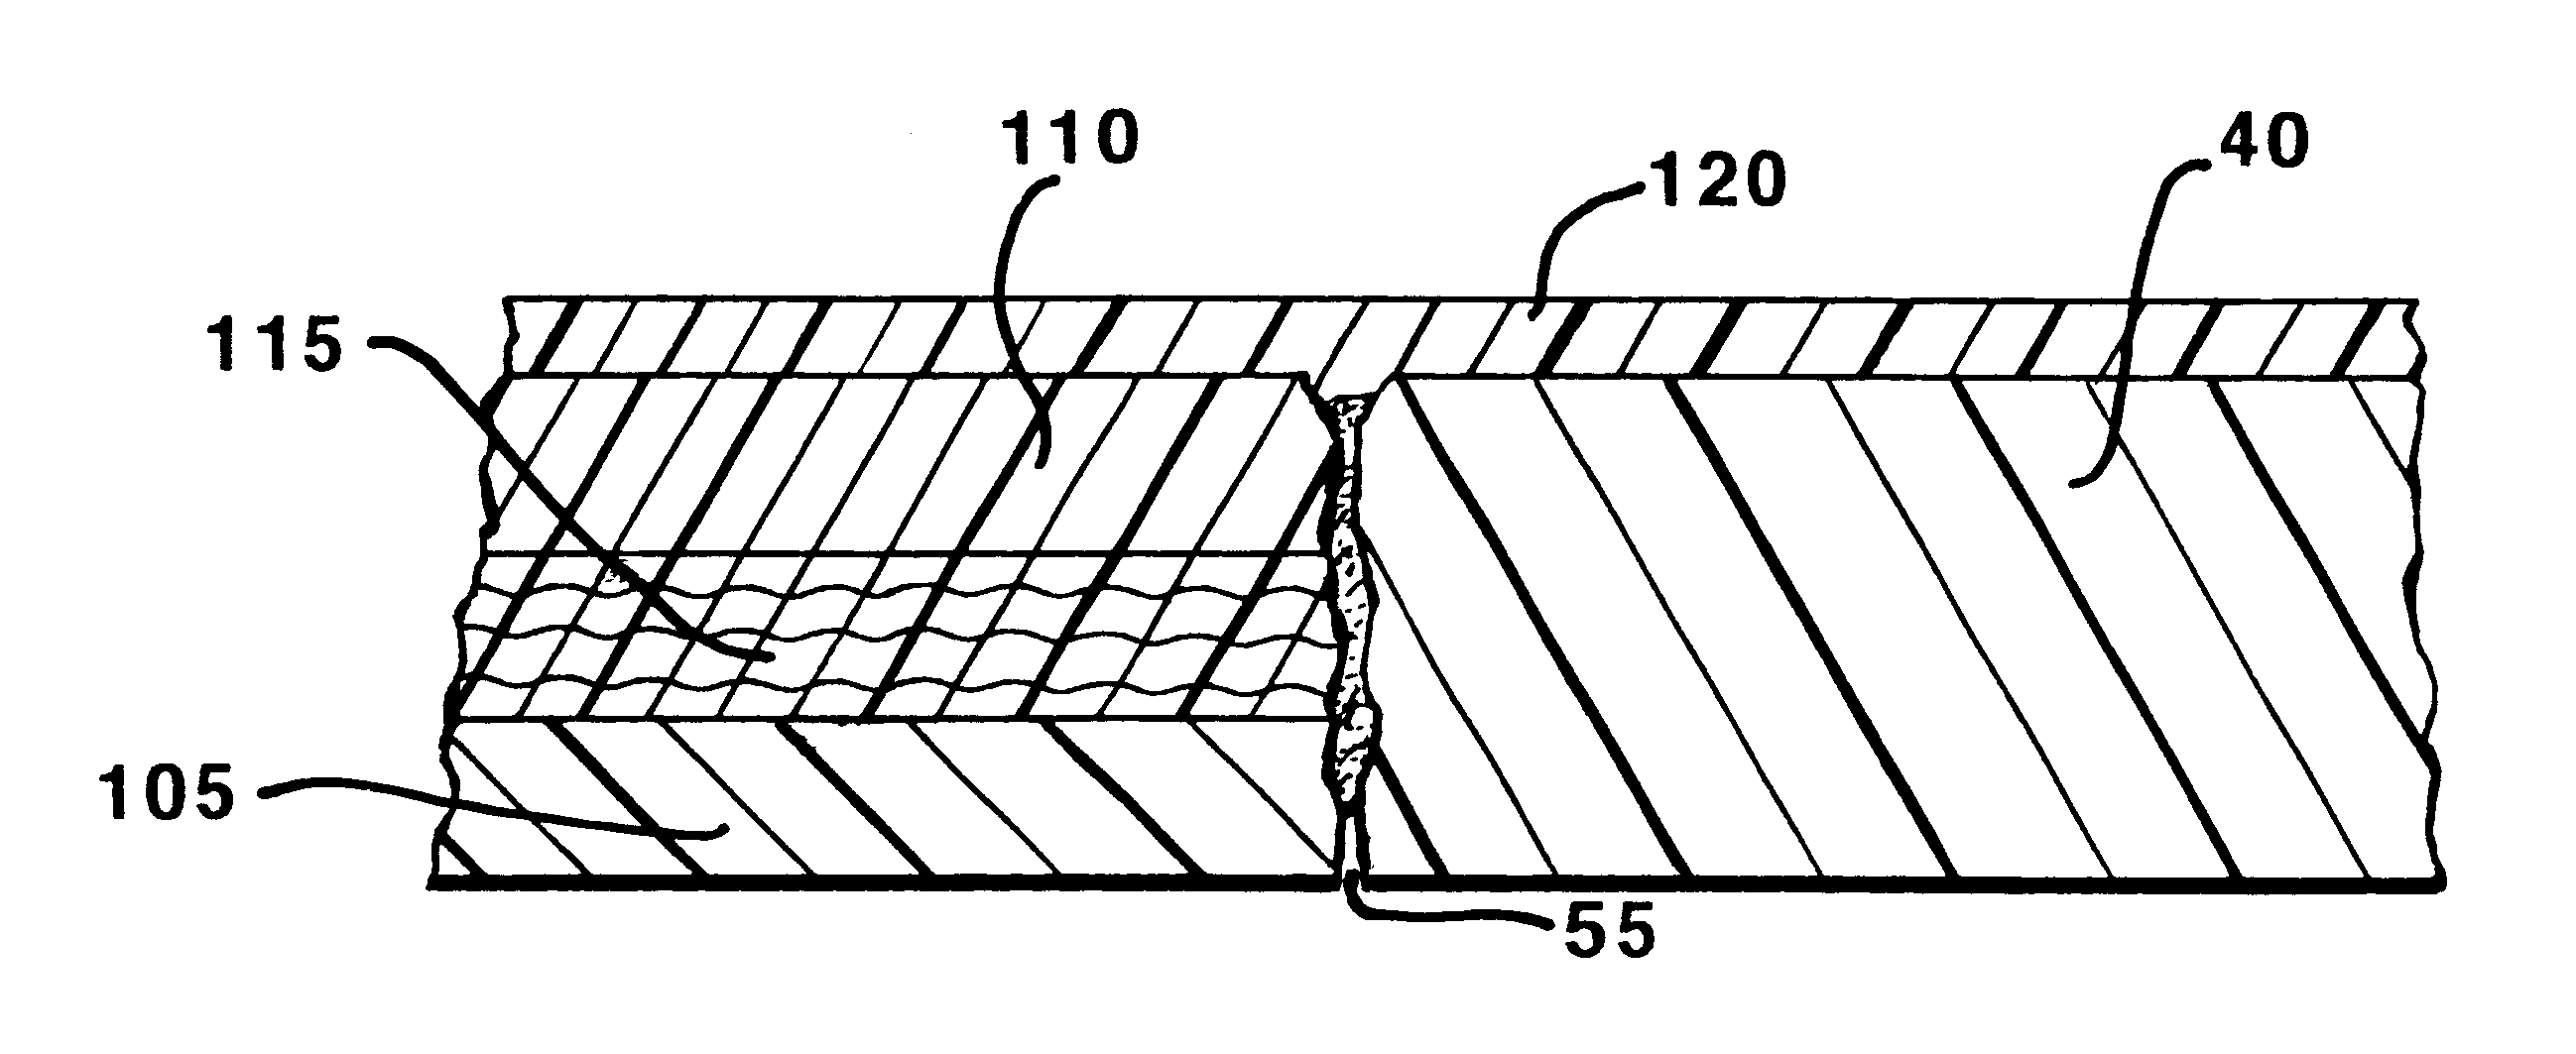 Soft tip guiding catheter and method of fabrication